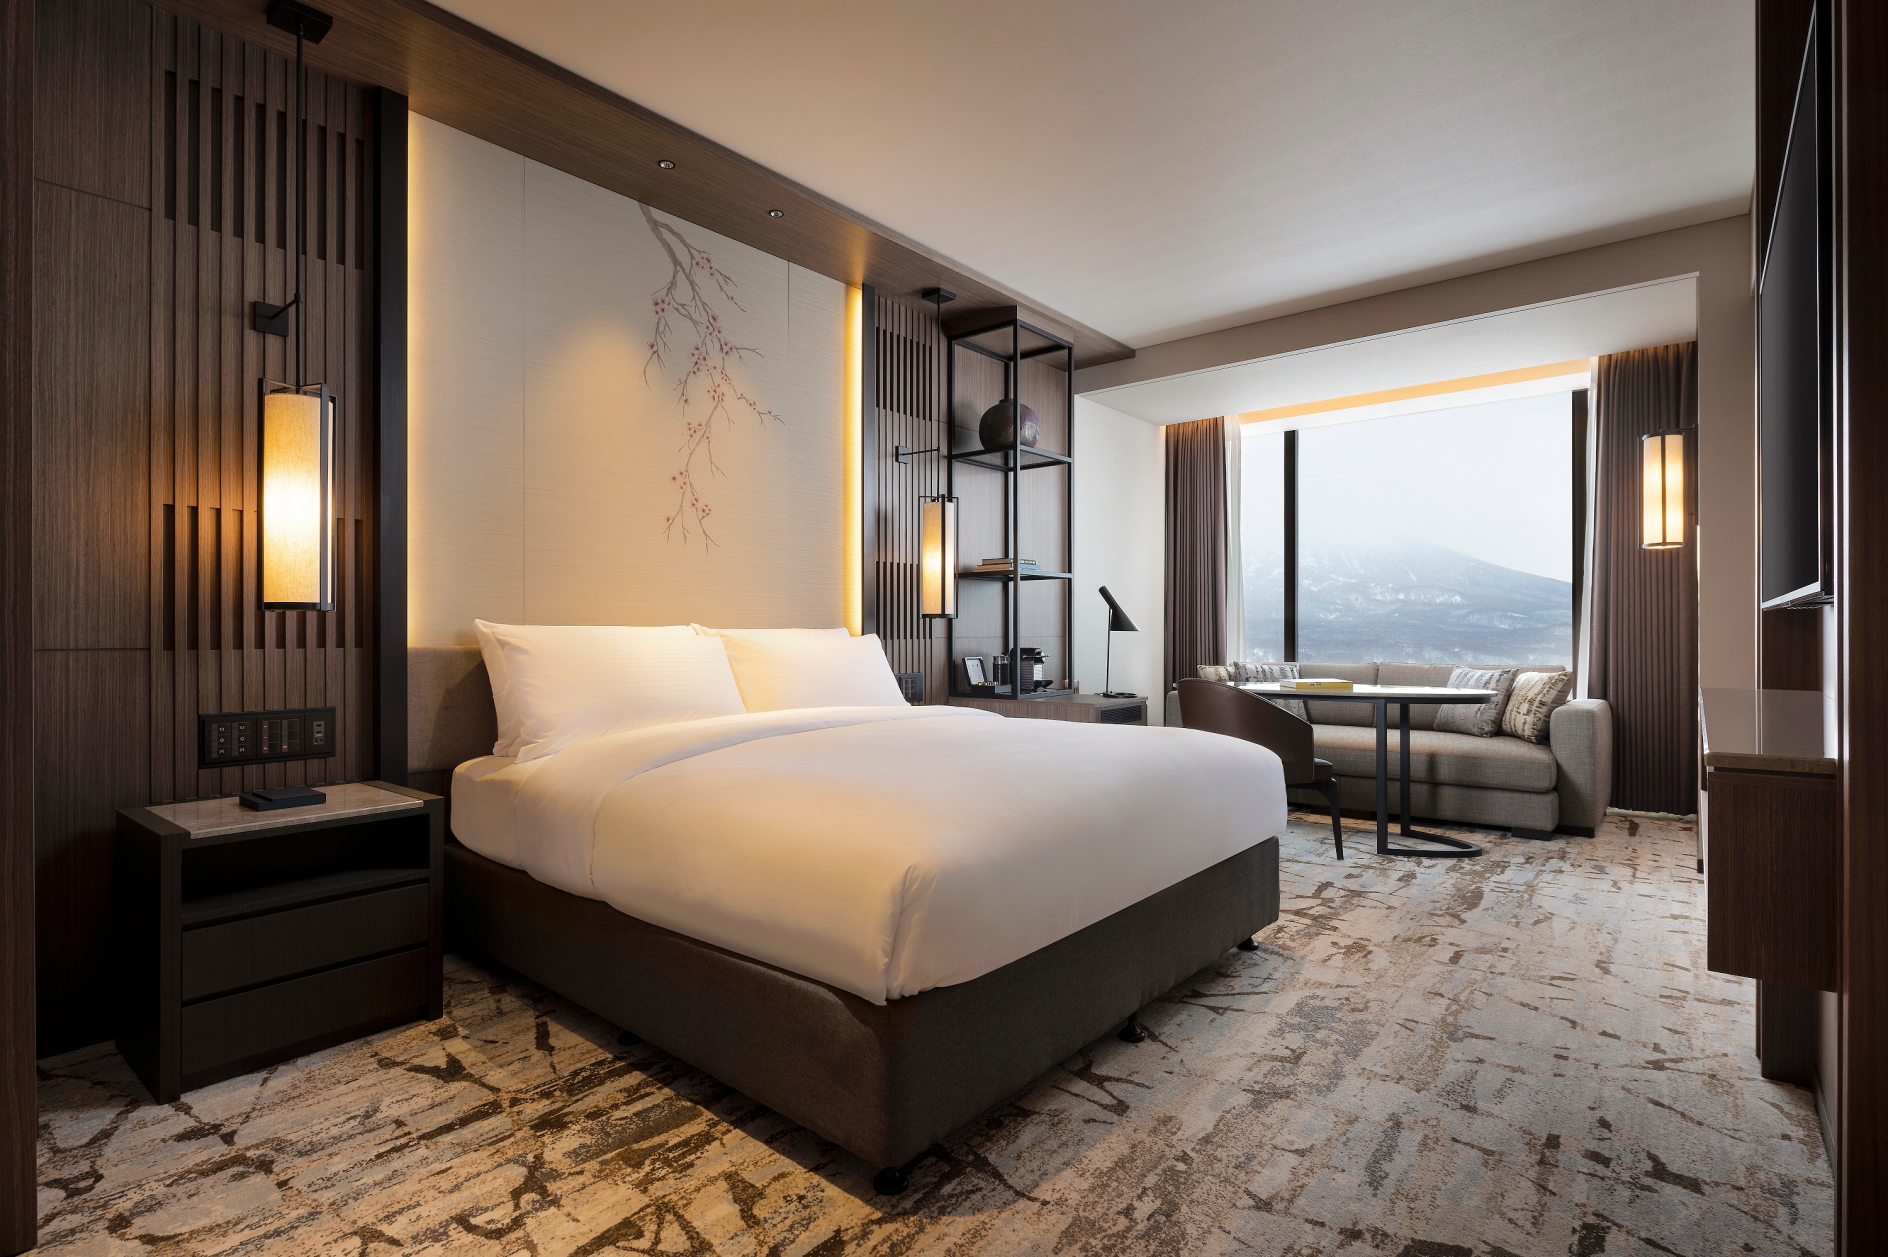 Luxurious bedroom of a Yotei Suite at Higashiyama Niseko Village, a Ritz-Carlton Reserve hotel. Click to enlarge.